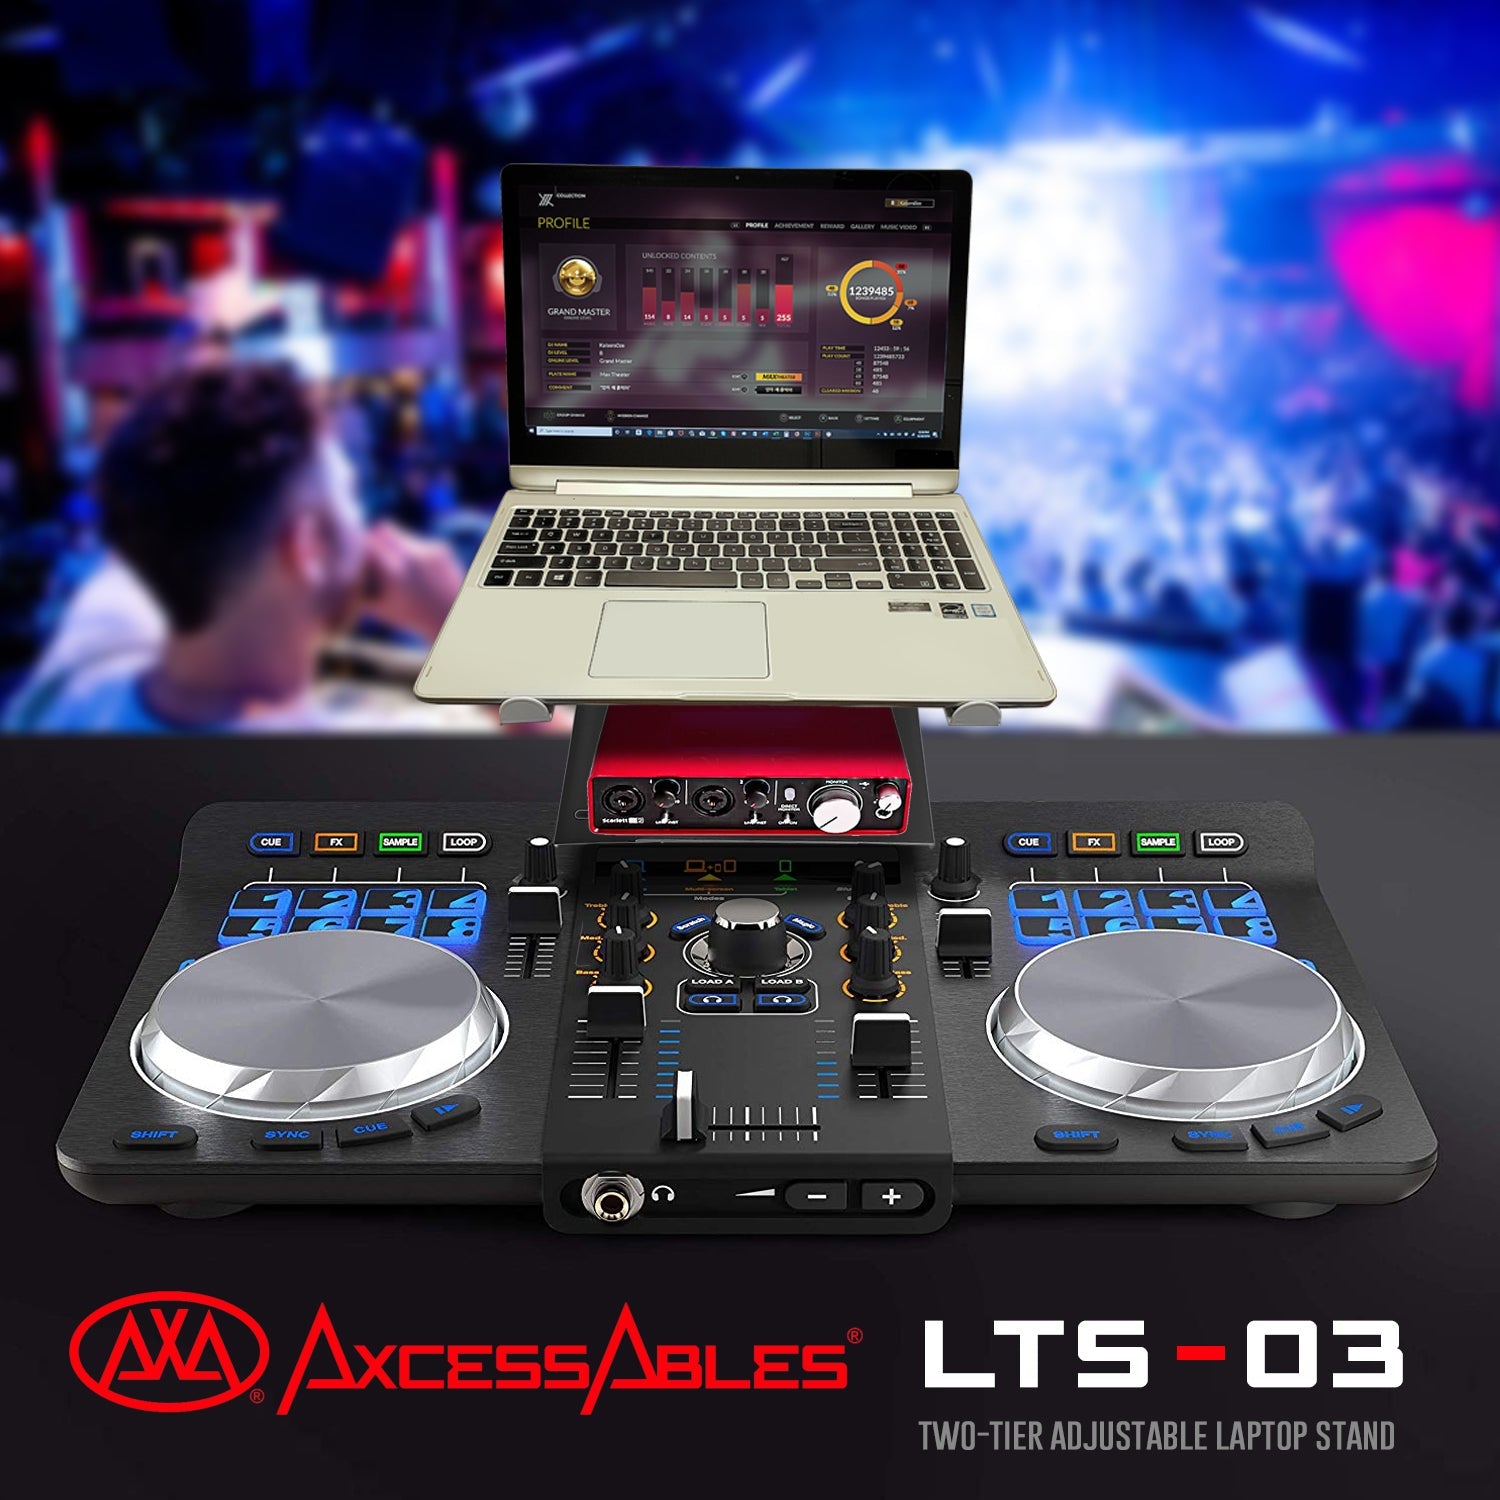 AxcessAbles Two-Tier Adjustable DJ Stand with Clamps | For DJ Controllers, Music Mixers, Laptops up to 20lbs.| DJ Controller Stand Compatible with DDJ-REV1, DDJ-FLX4 | DJ Laptop Stand (LTS-03 Black)